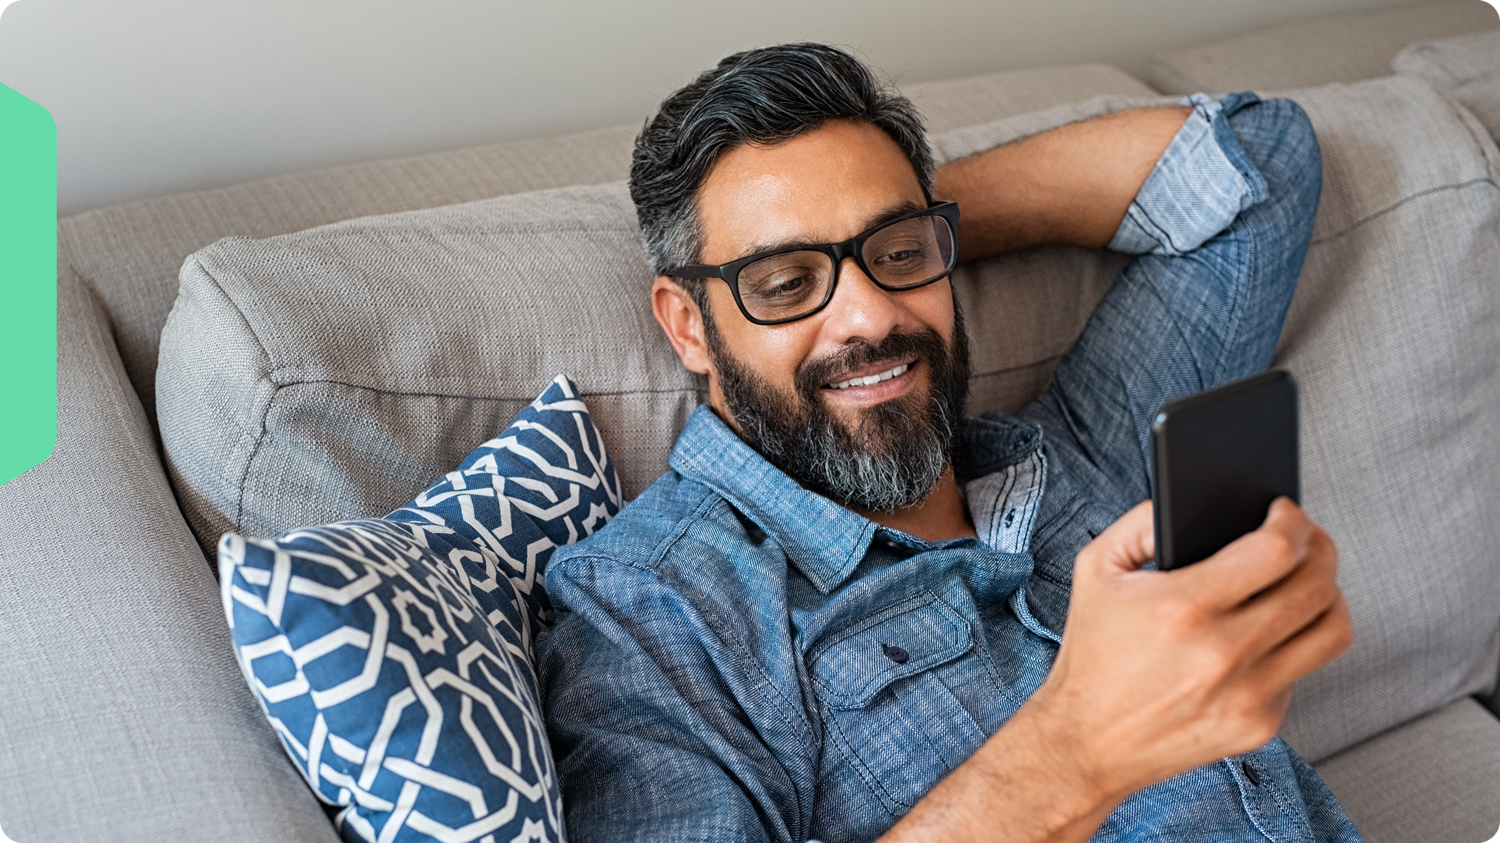 A man, smiling, browsing Wholescripts.com on his phone from his couch